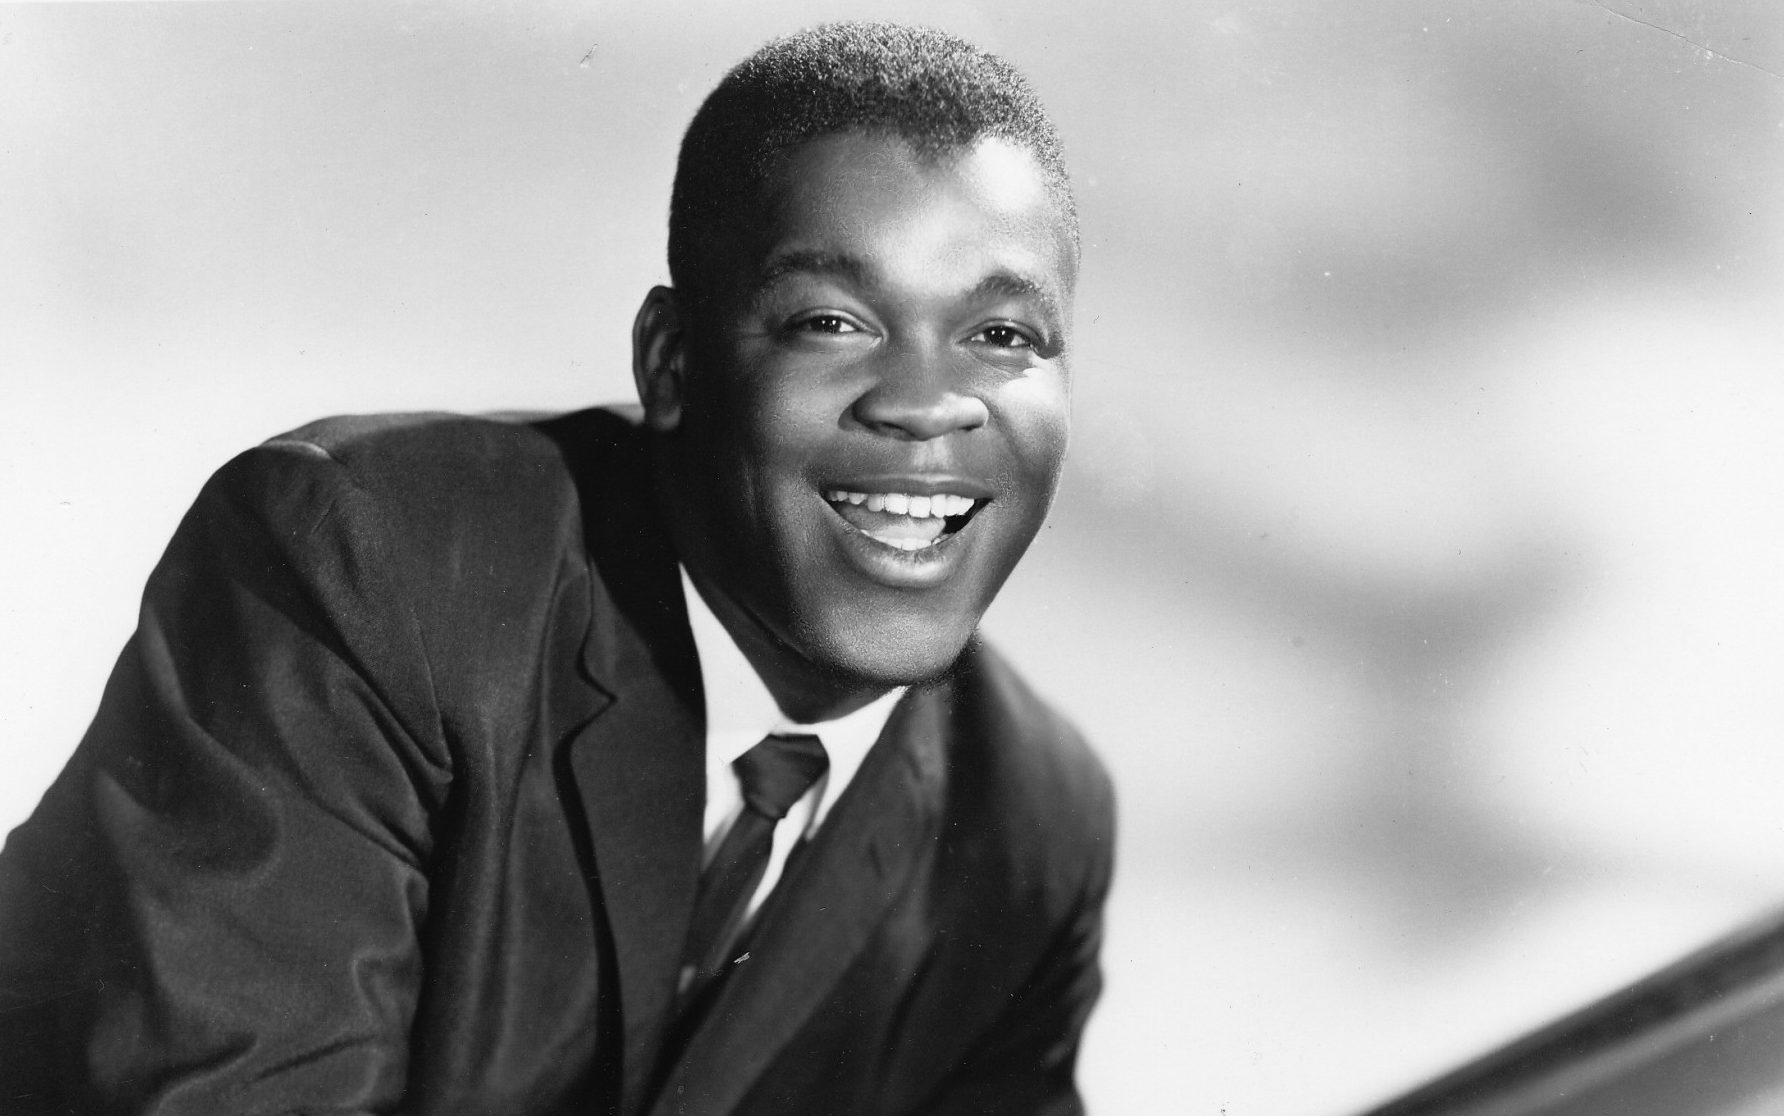 clarence ‘frogman’ henry, r’n’b singer and pianist who toured with the beatles – obituary